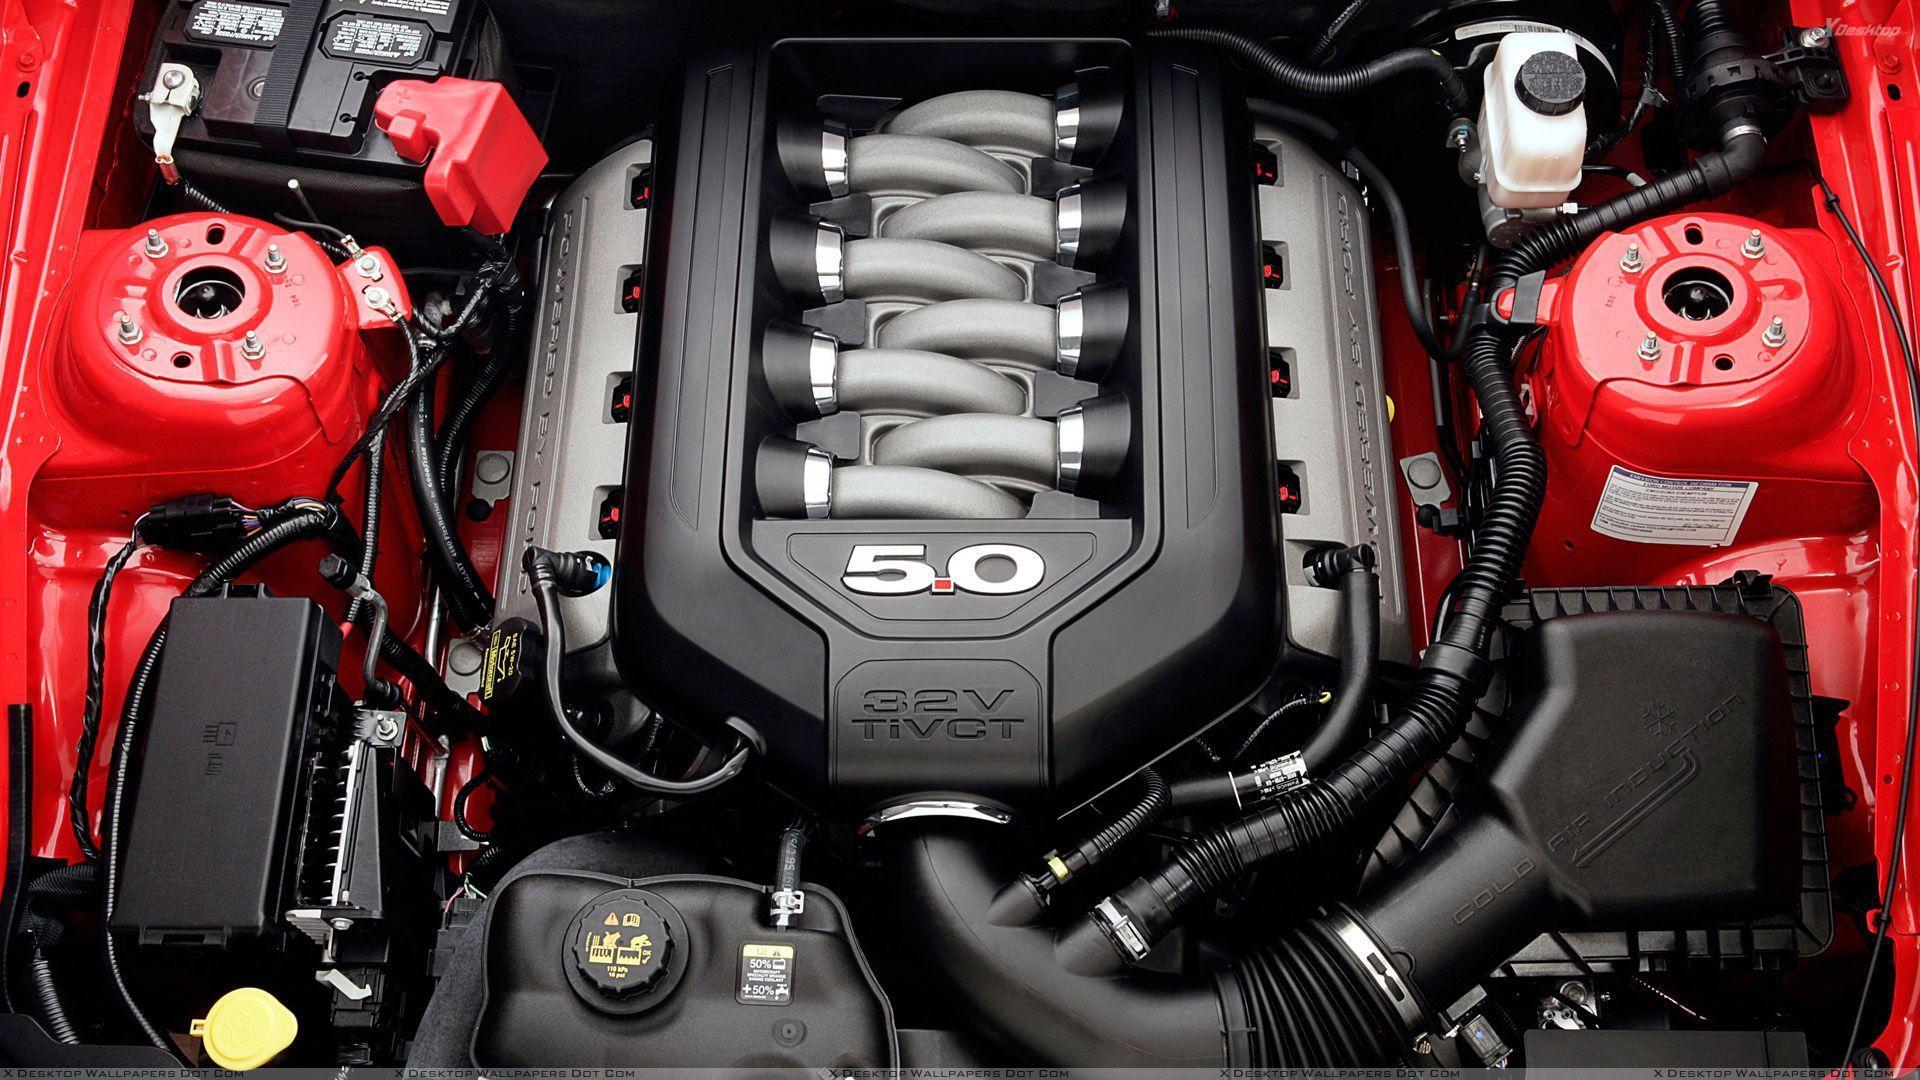 Car Engines Wallpapers, Photos & Image in HD